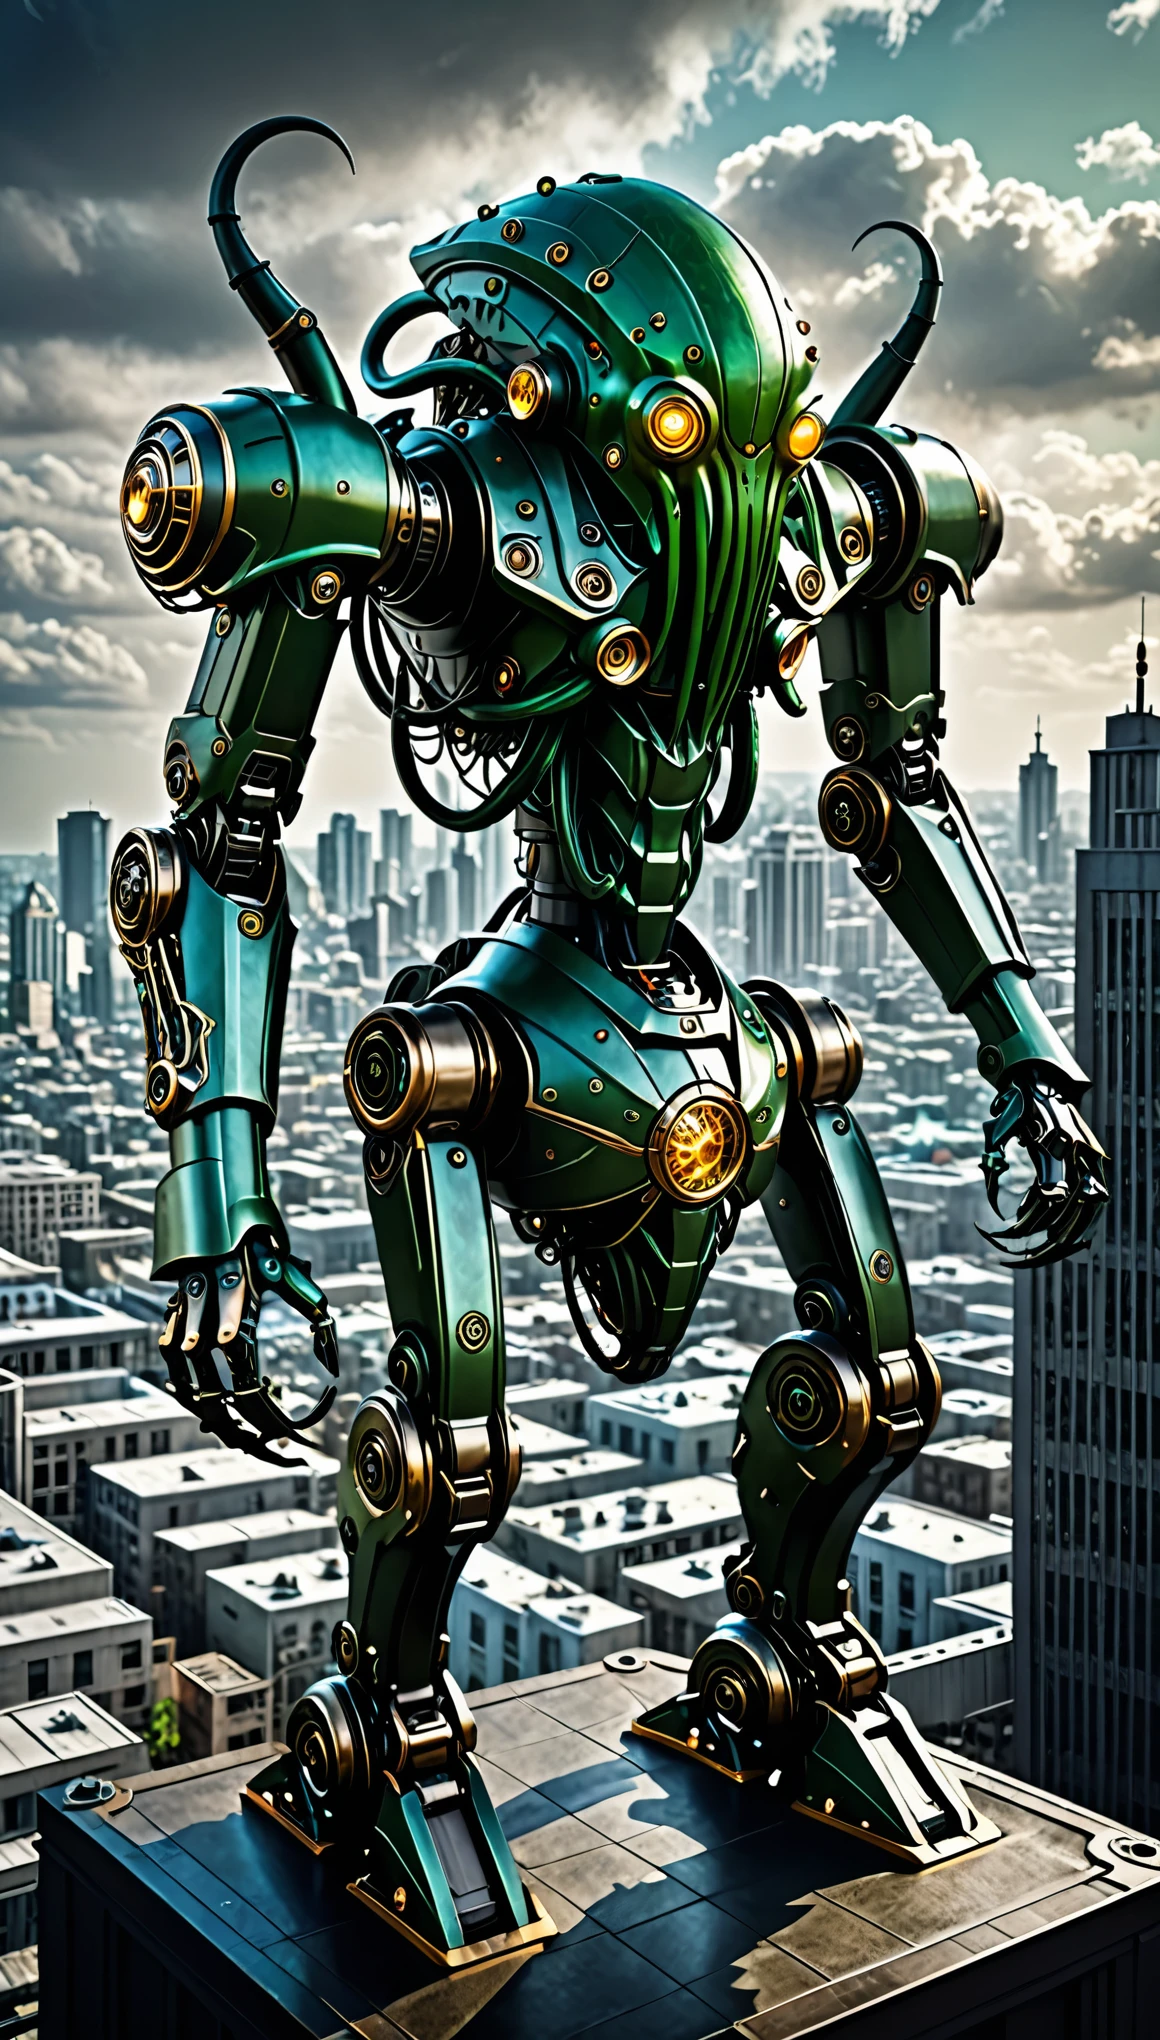 best quality, super fine, 16k, extremely detailed, 2.5D, delicate and dynamic, clockwork Cthulhu mech robot android, looking at city from above, ready to attack, dark fantasy effect